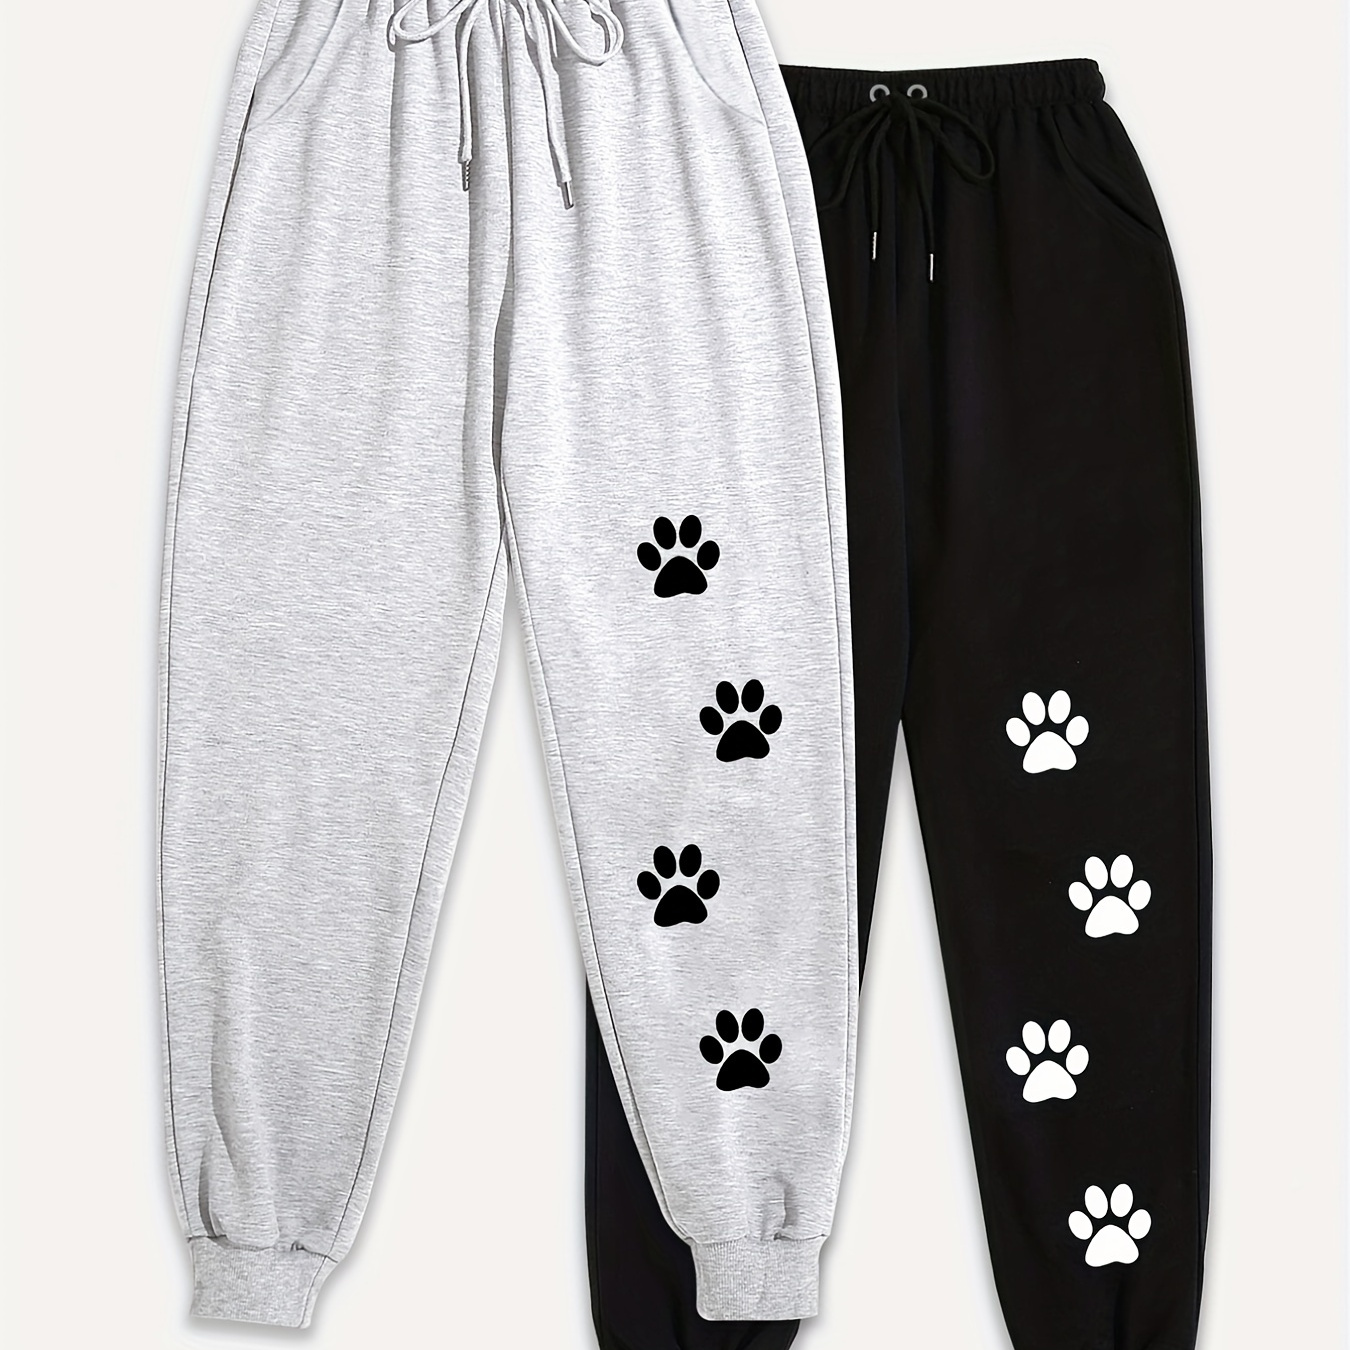 

2 Pieces Paw Print Sweatpants, Casual Elastic Drawstring Jogger Pants For Spring & Fall, Women's Clothing